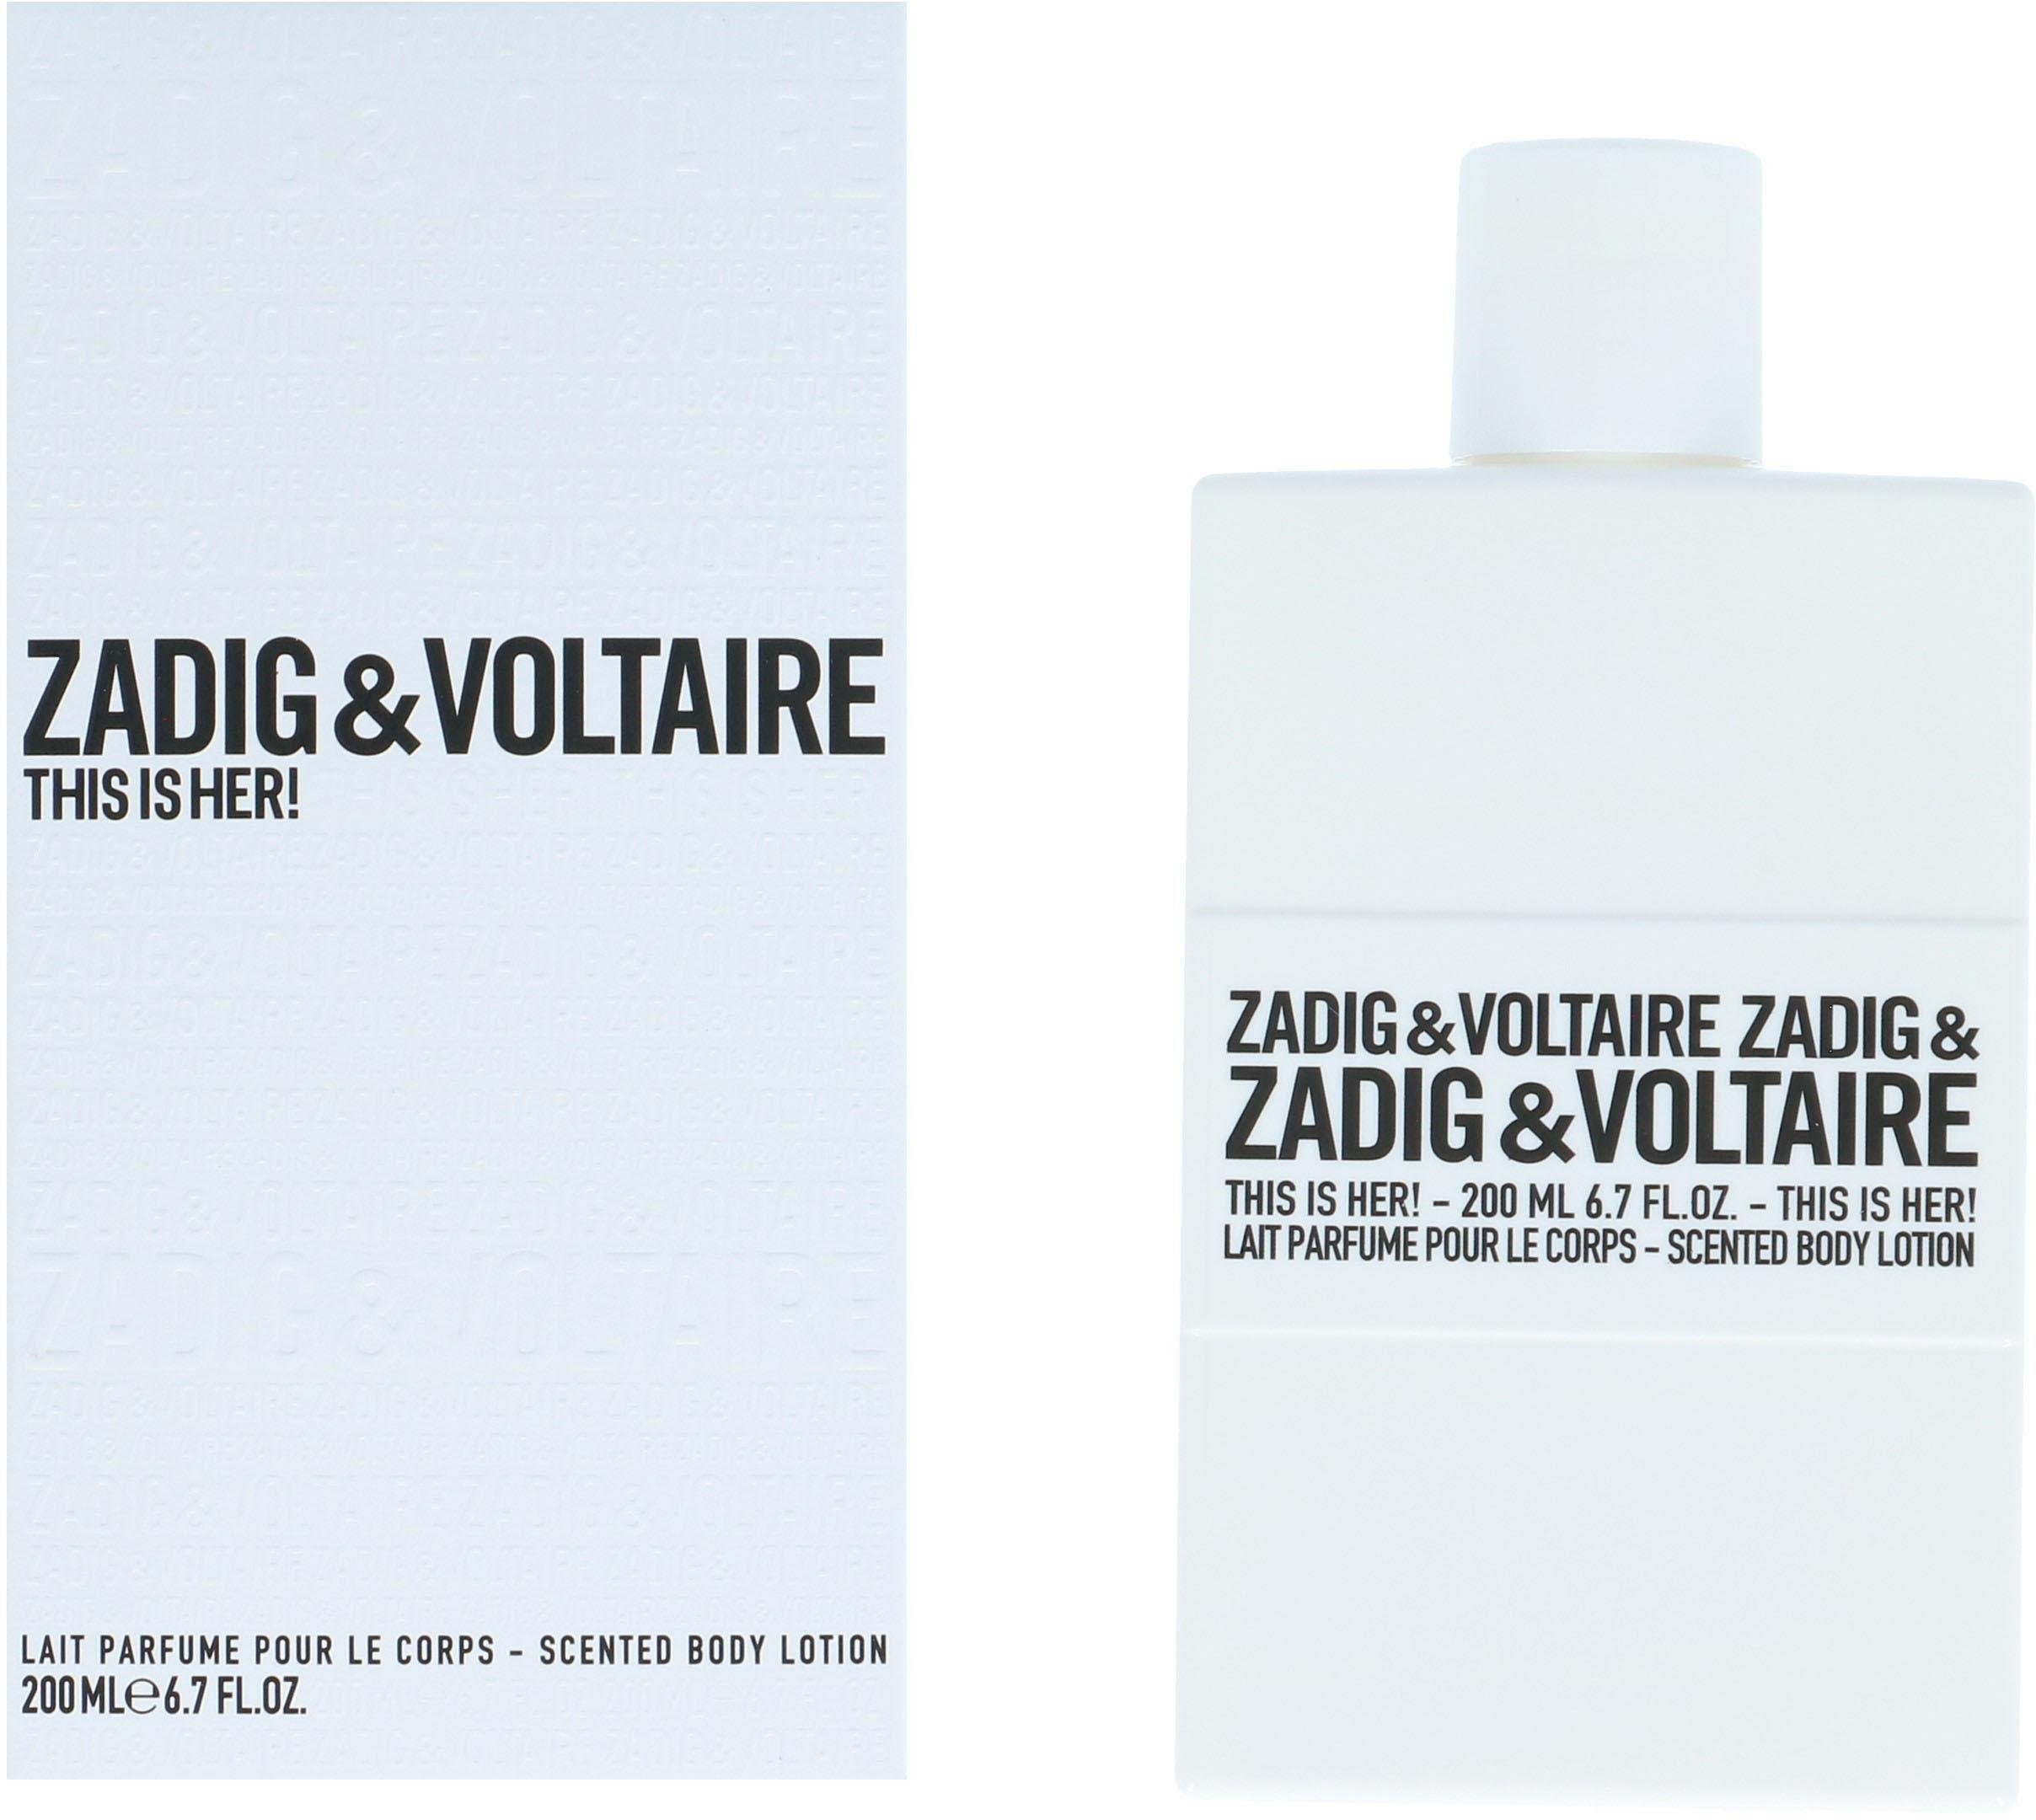 VOLTAIRE & Her! is Bodylotion ZADIG This